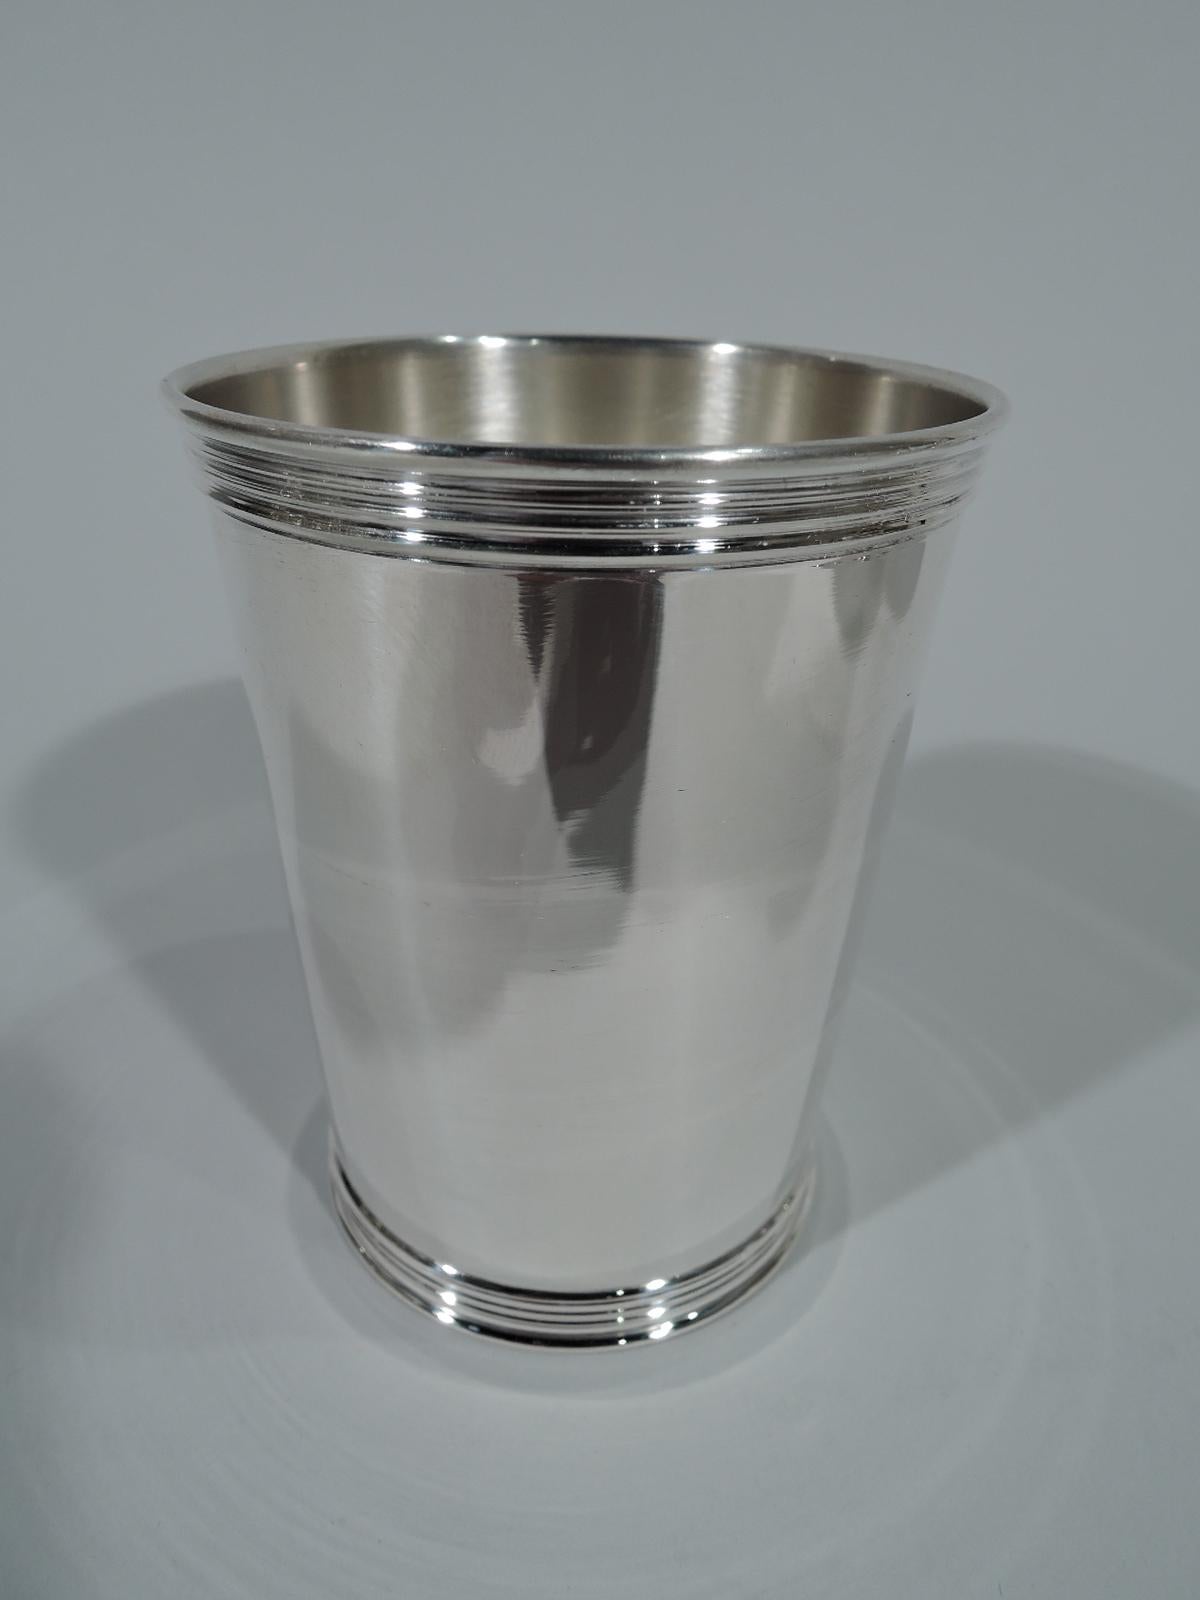 Set of six American sterling silver mint julep cups. Each: Straight and tapering sides and reeded rims. On underside is engraved a stylish presentation honoring so many years of loyal service with Brown-Forman, a Kentucky spirits maker. The